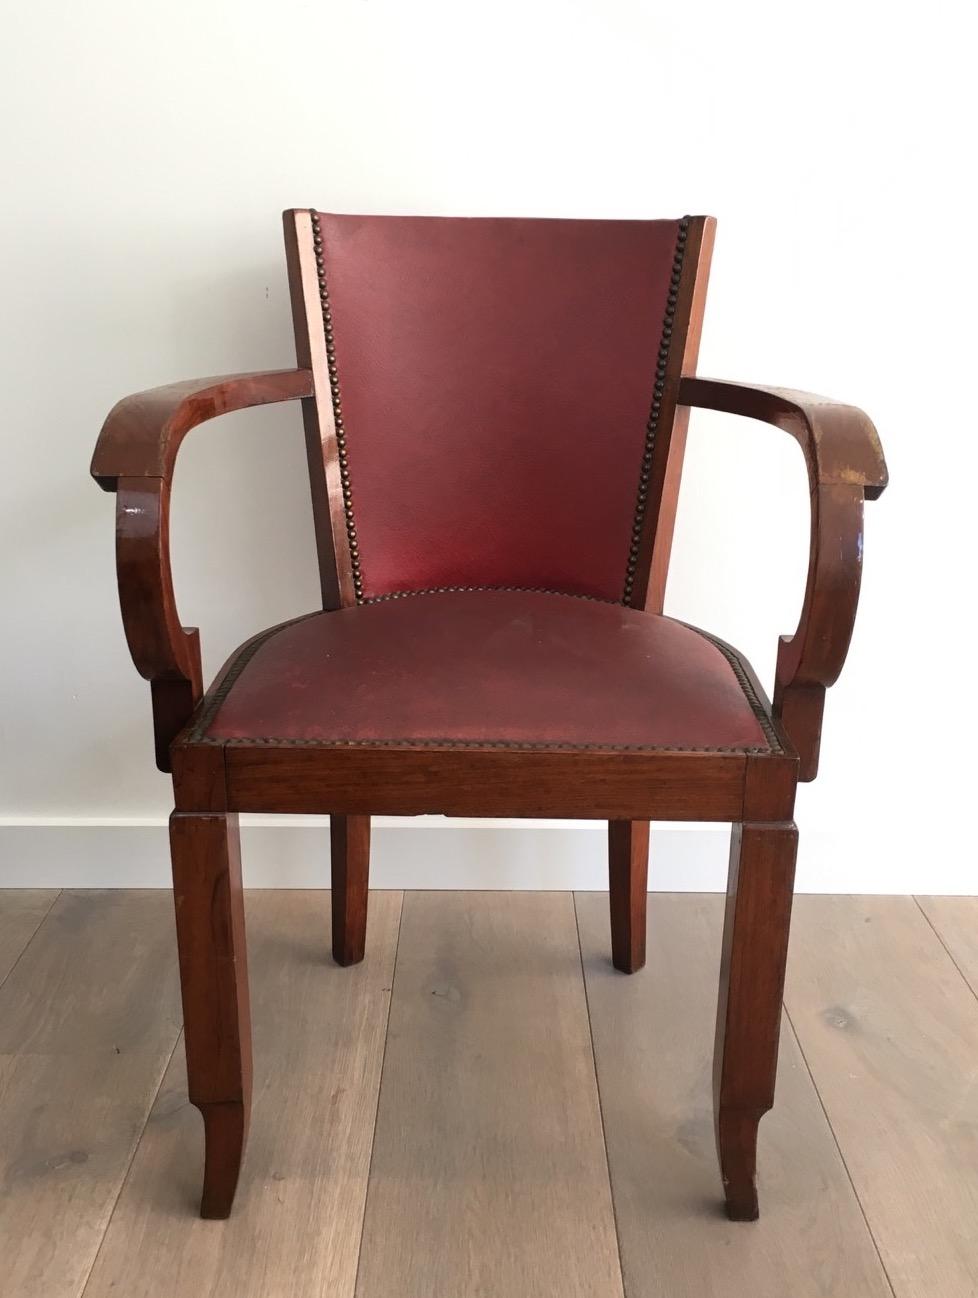 Rare Set of 8 Mahogany and Faux-Leather Art Deco Armchairs, French, circa 1930 For Sale 8